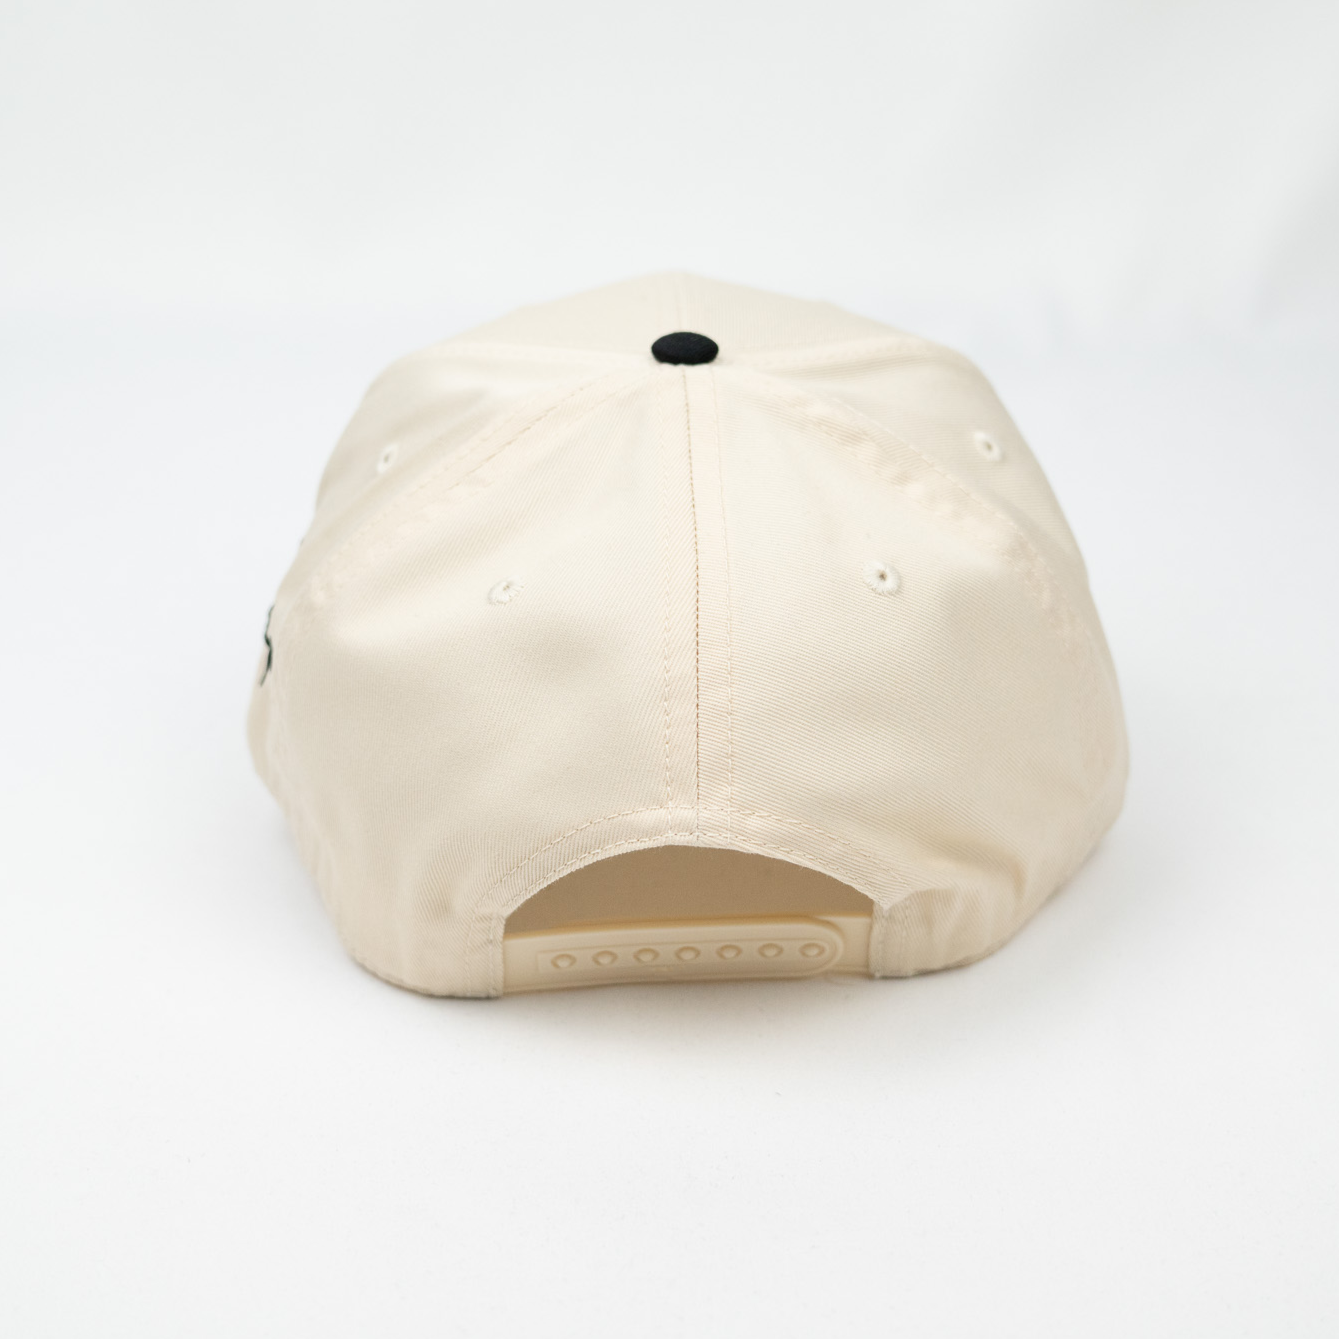 Nothing Great Happens Rushed Snapback Hat (CREAM/BLACK)